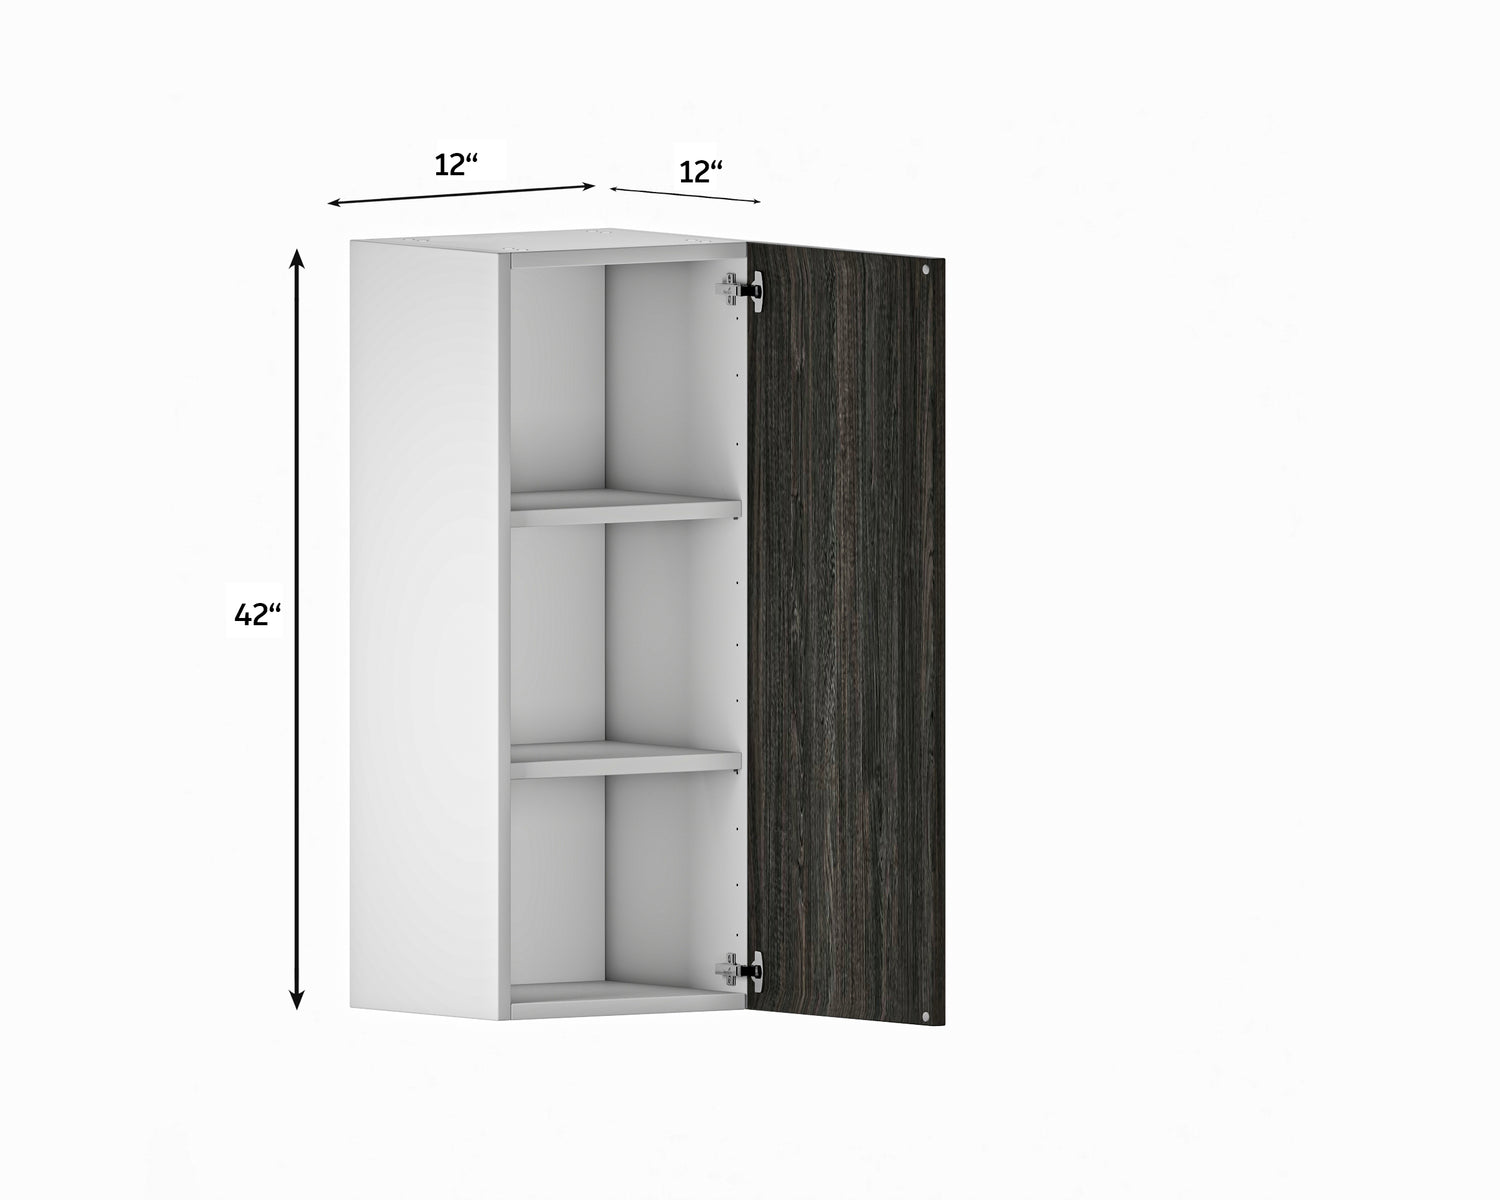 Quick Assemble Modern Style with Soft Close 12 in Wall Kitchen Cabinet (12 in W x 12 D x 42 in H)